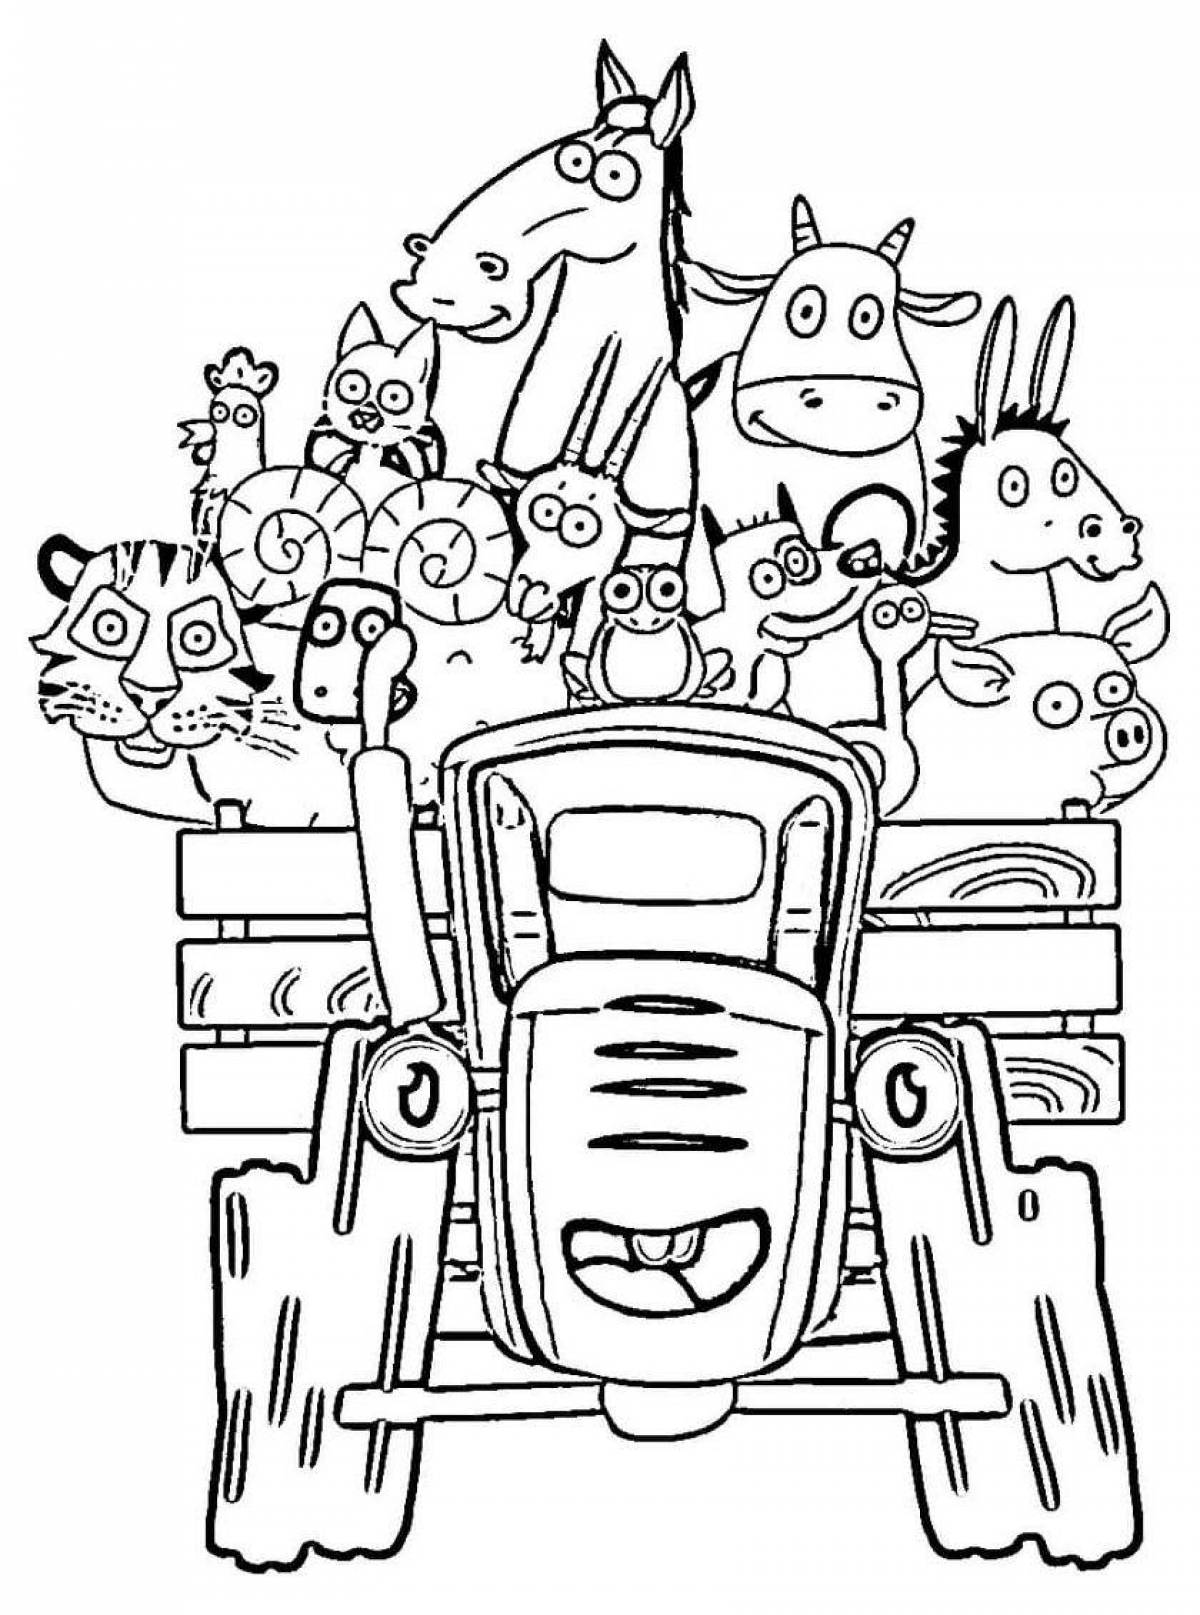 Comic blue tractor coloring book